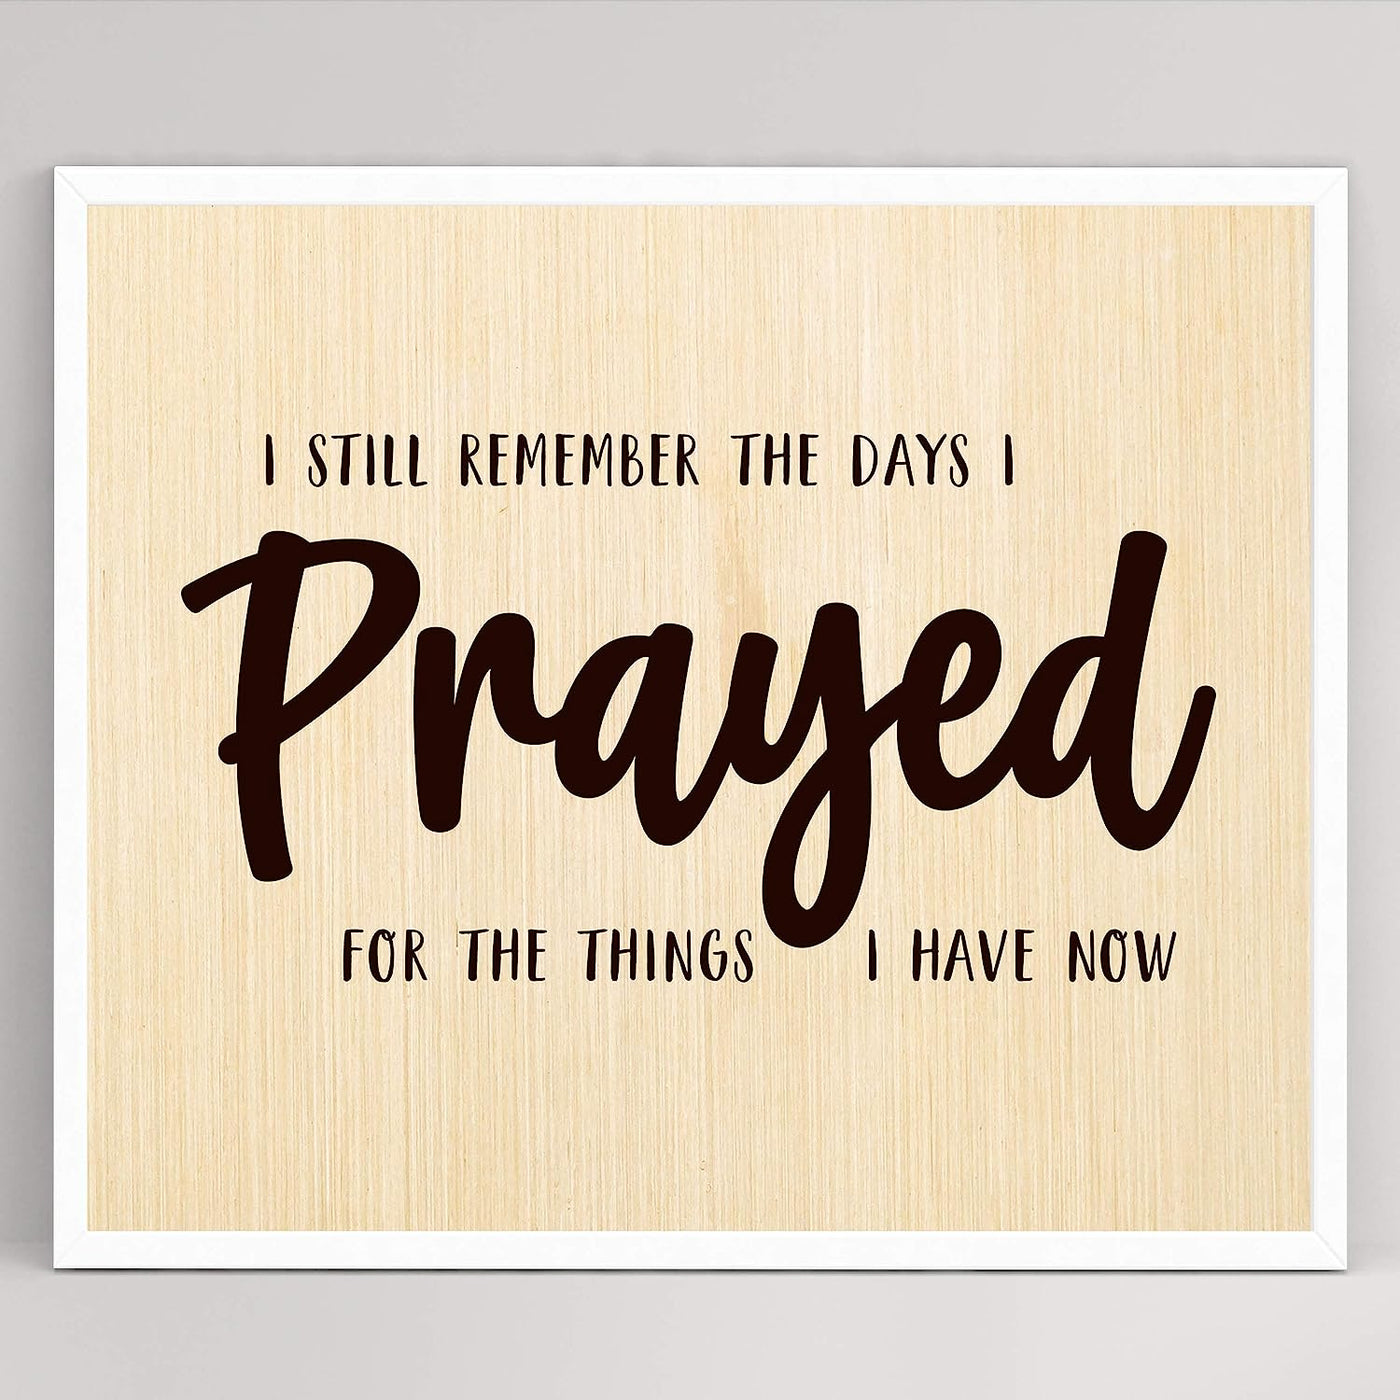 ?Remember the Days I Prayed For Things I Have Now" Prayer Wall Art -10 x 8" Rustic Christian Farmhouse Print-Ready to Frame. Inspirational Home-Office-Church-Religious Decor. Printed on Photo Paper.